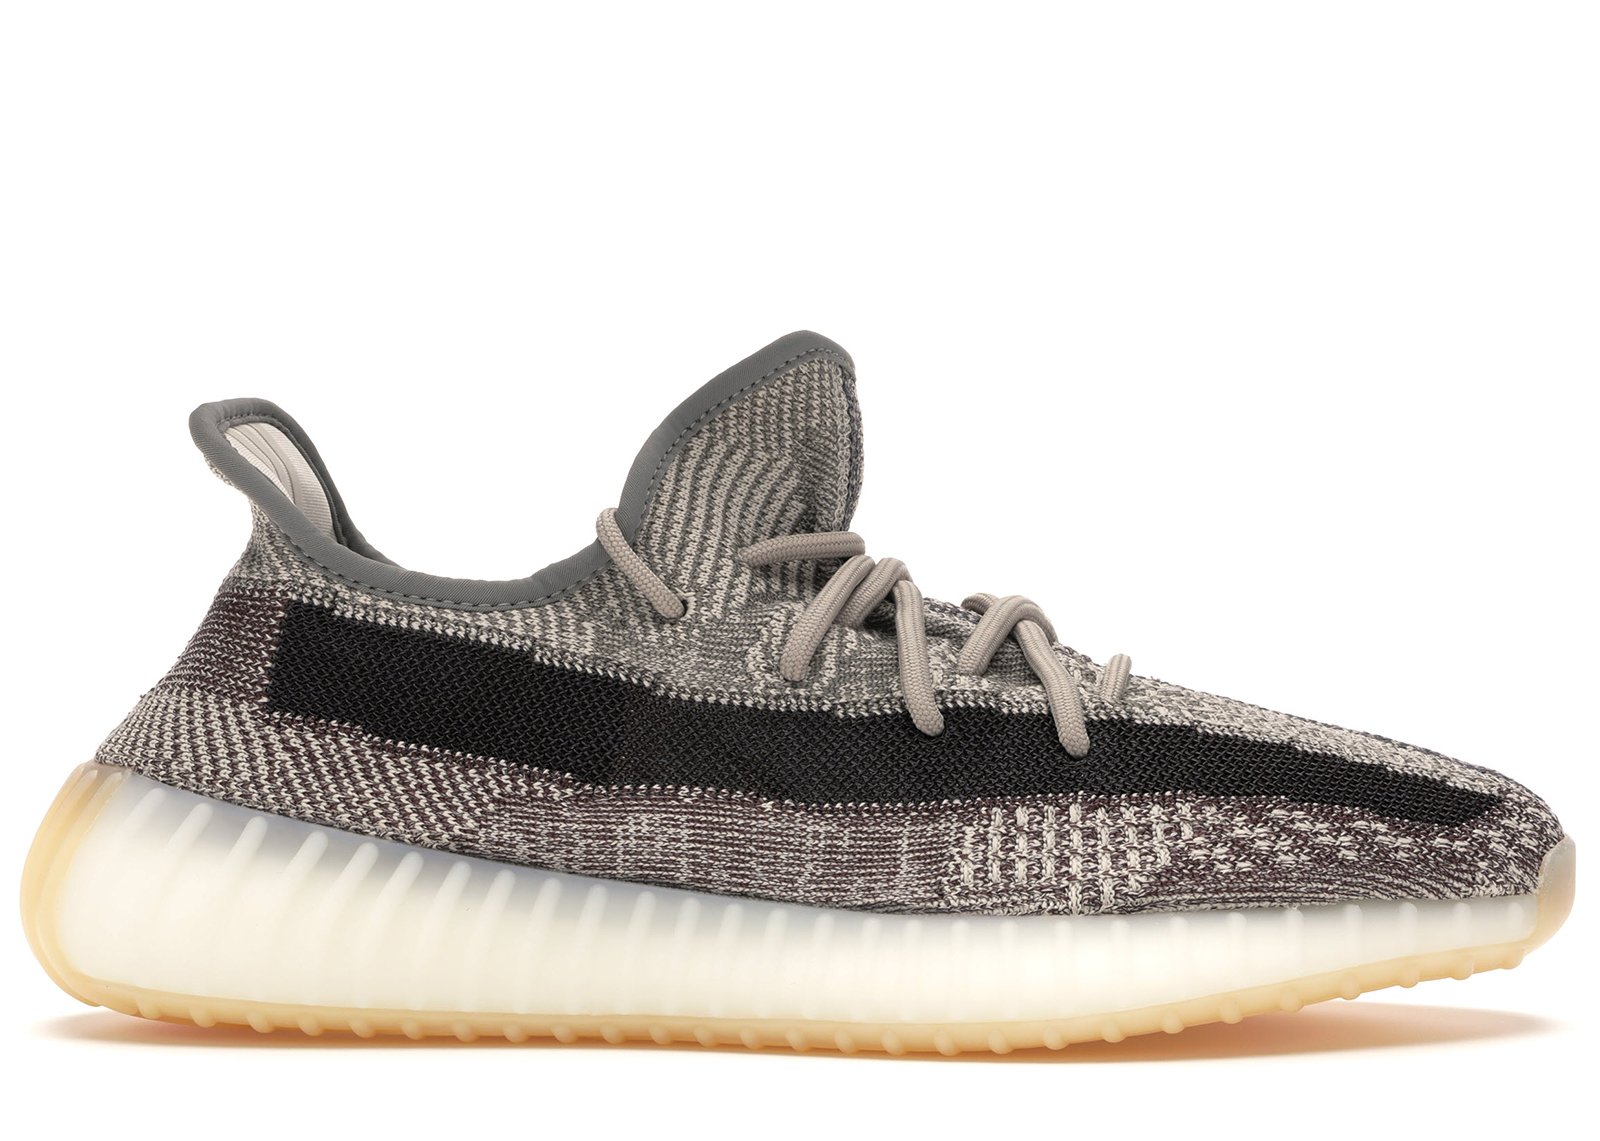 adidas Yeezy Boost 350 V2 Zyon sneakers